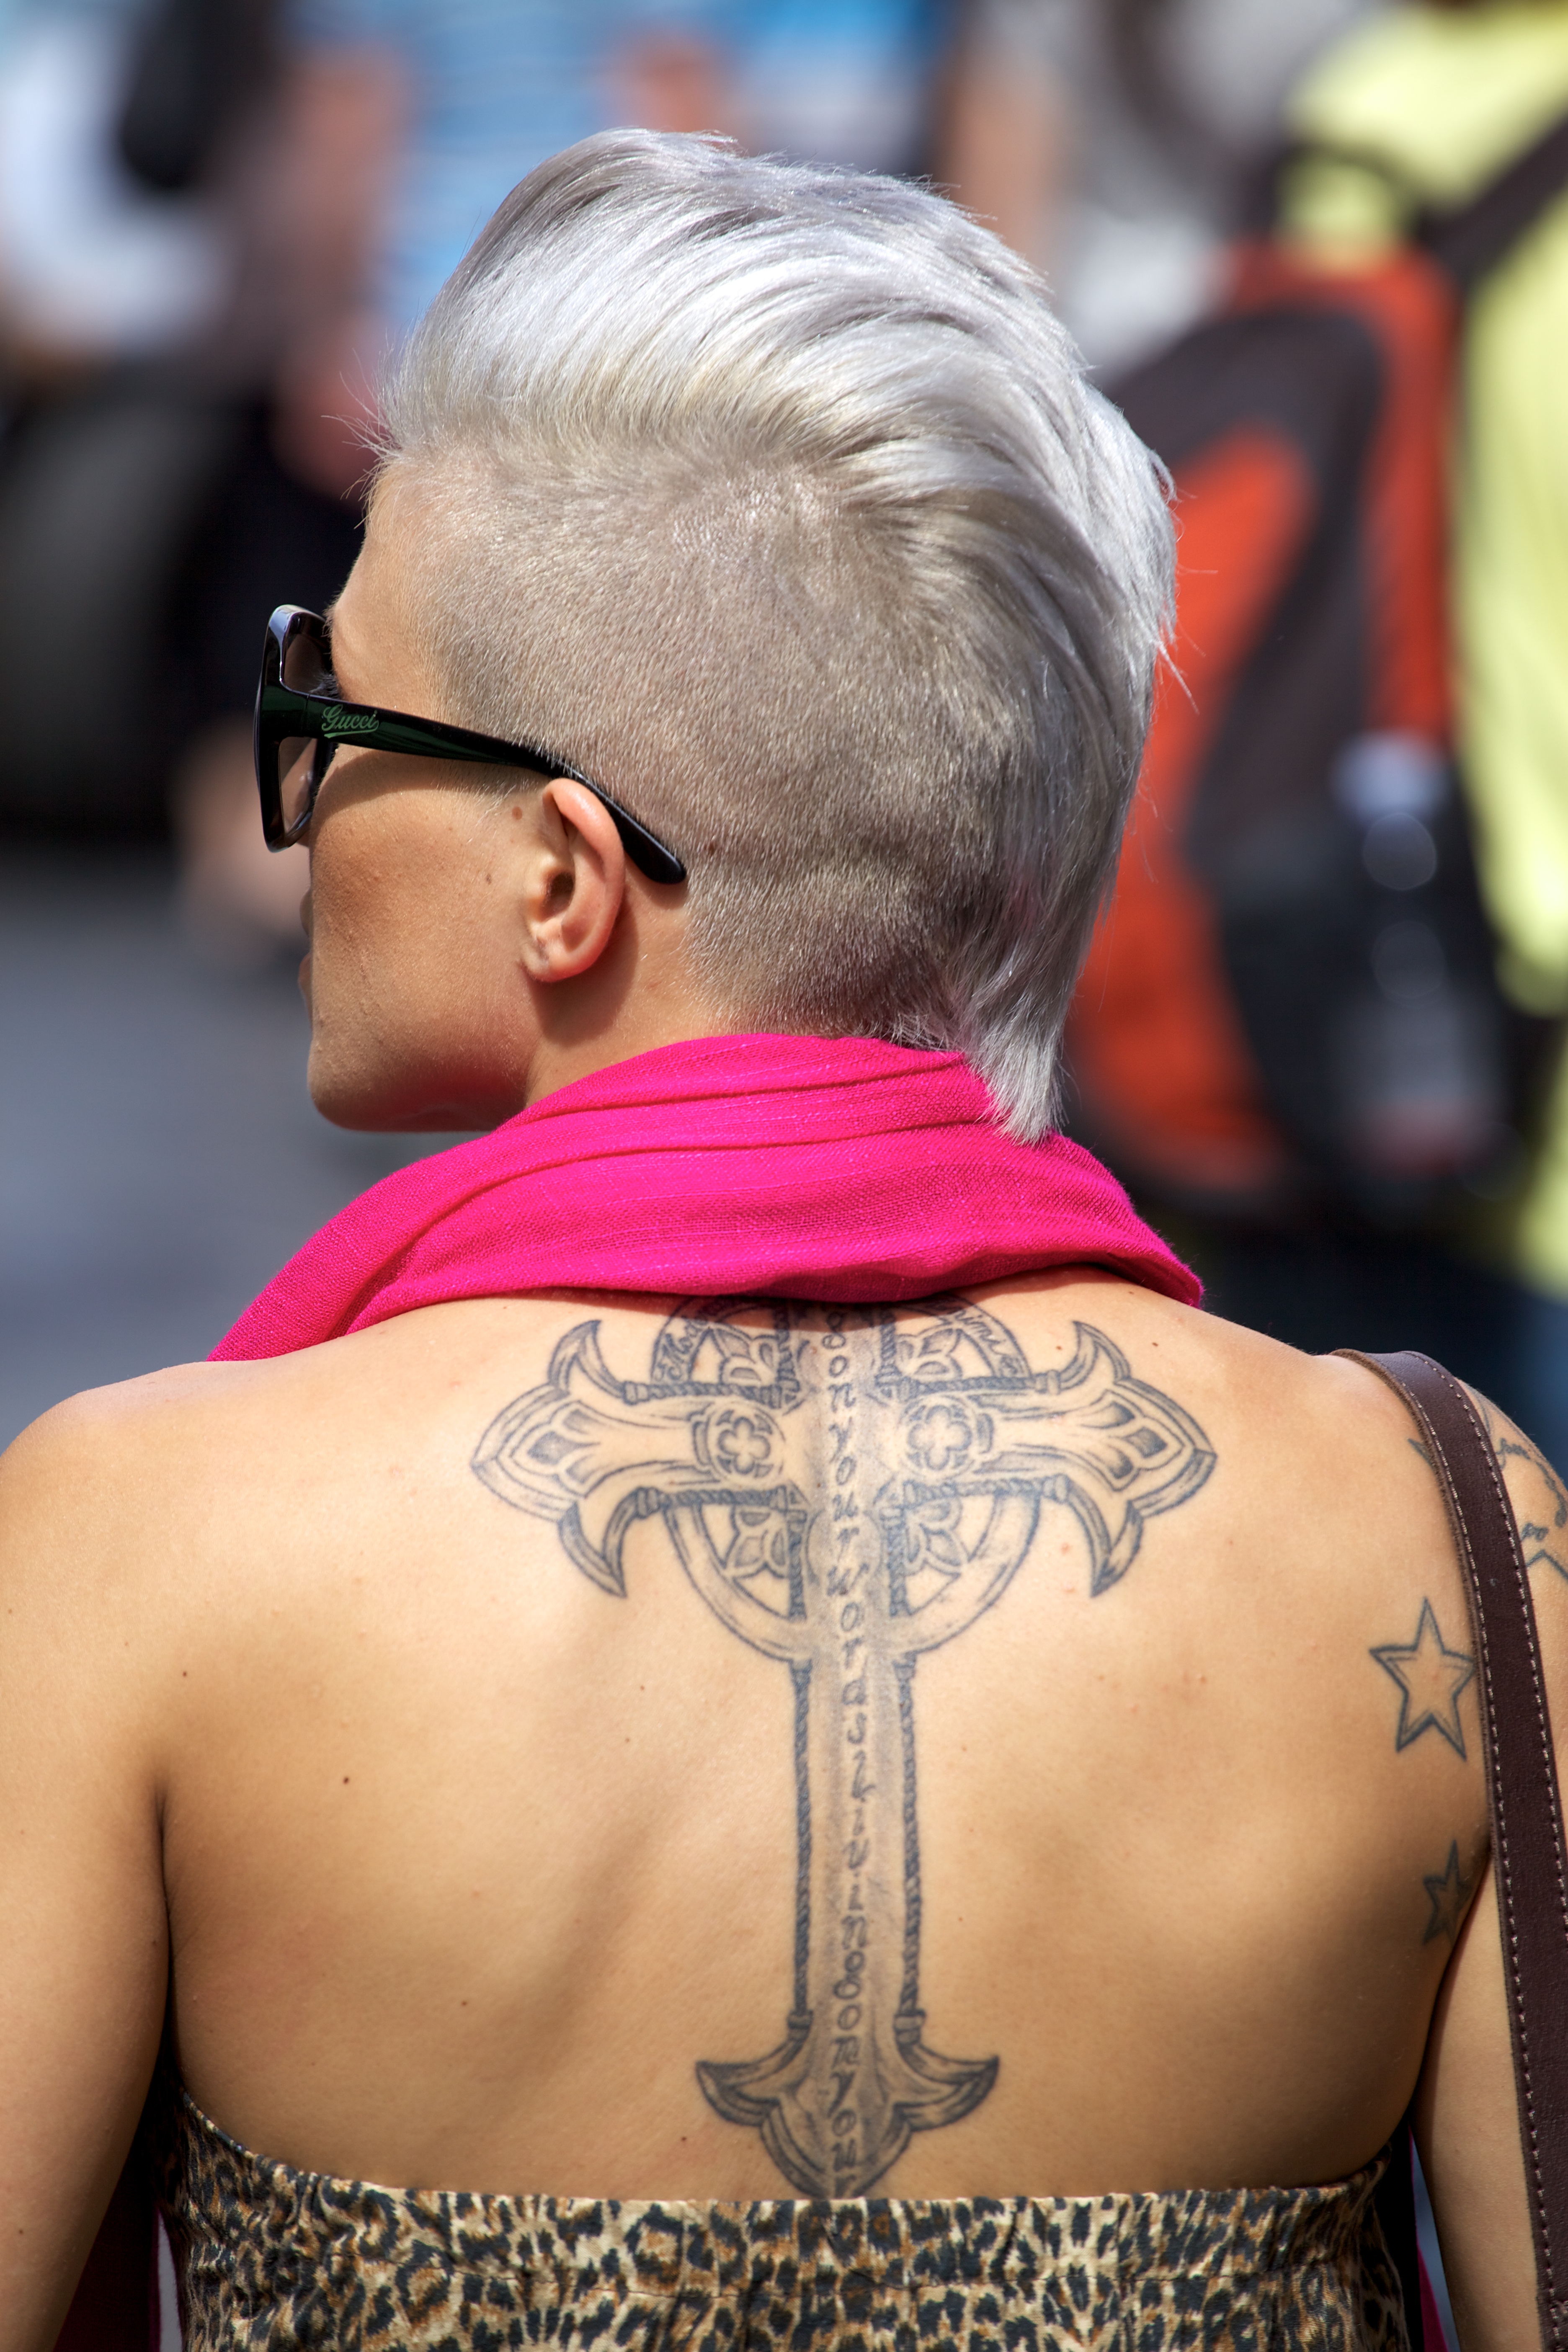 Woman With Large Cross Tattoo On Her Back in Rome 